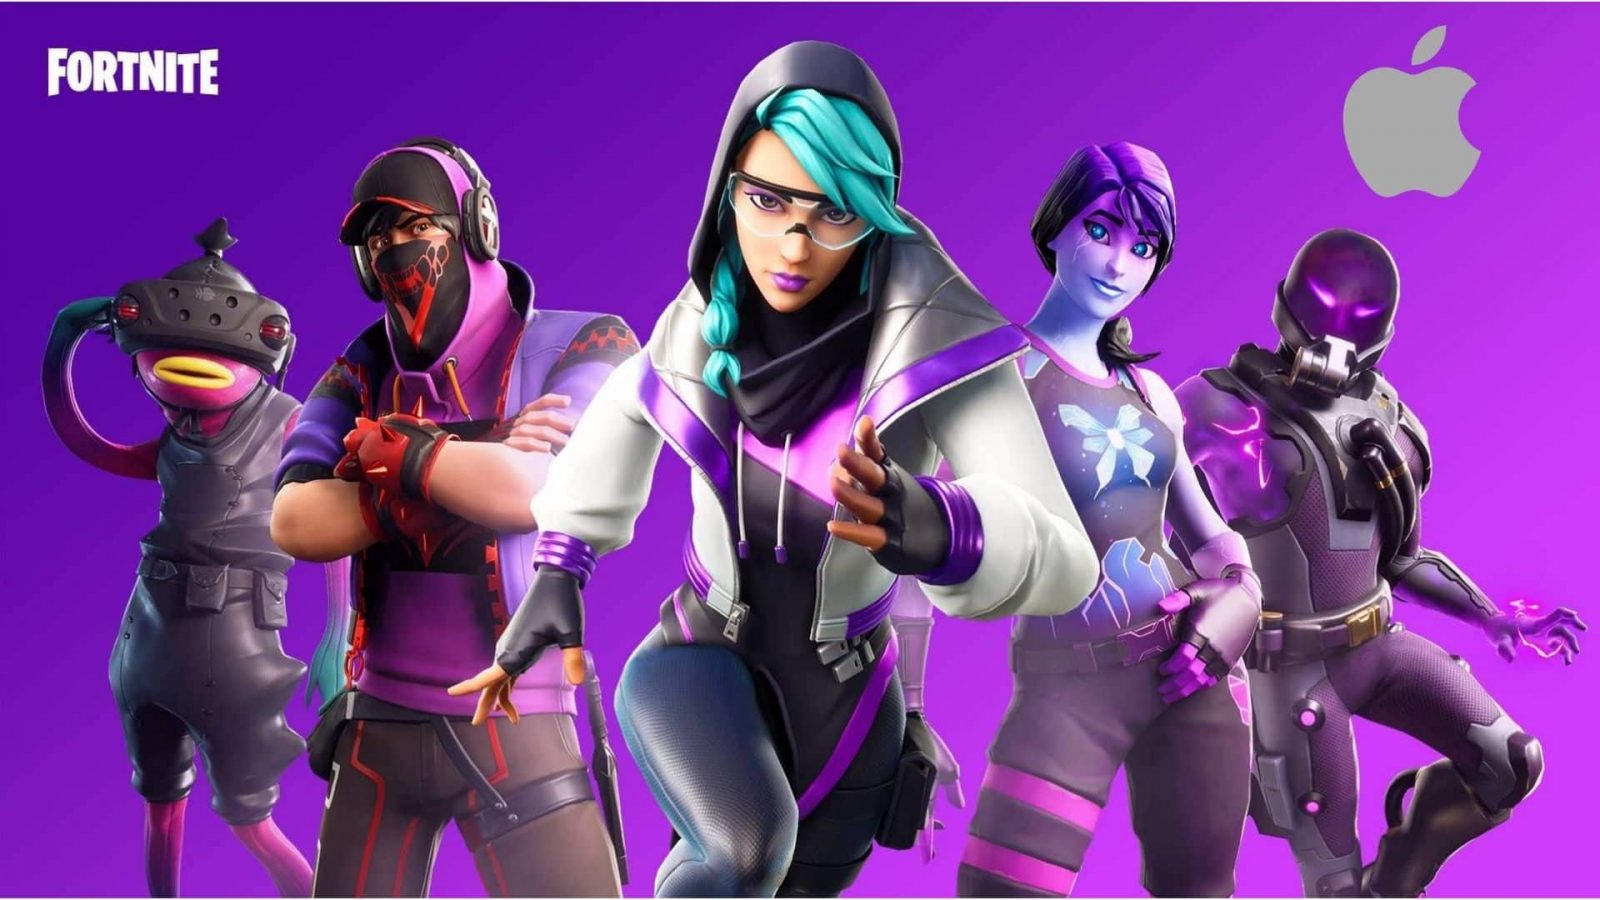 Fortnite goes Rogue: Analyzing Epic's Lawsuit against Google and Apple – II  – Metacept®